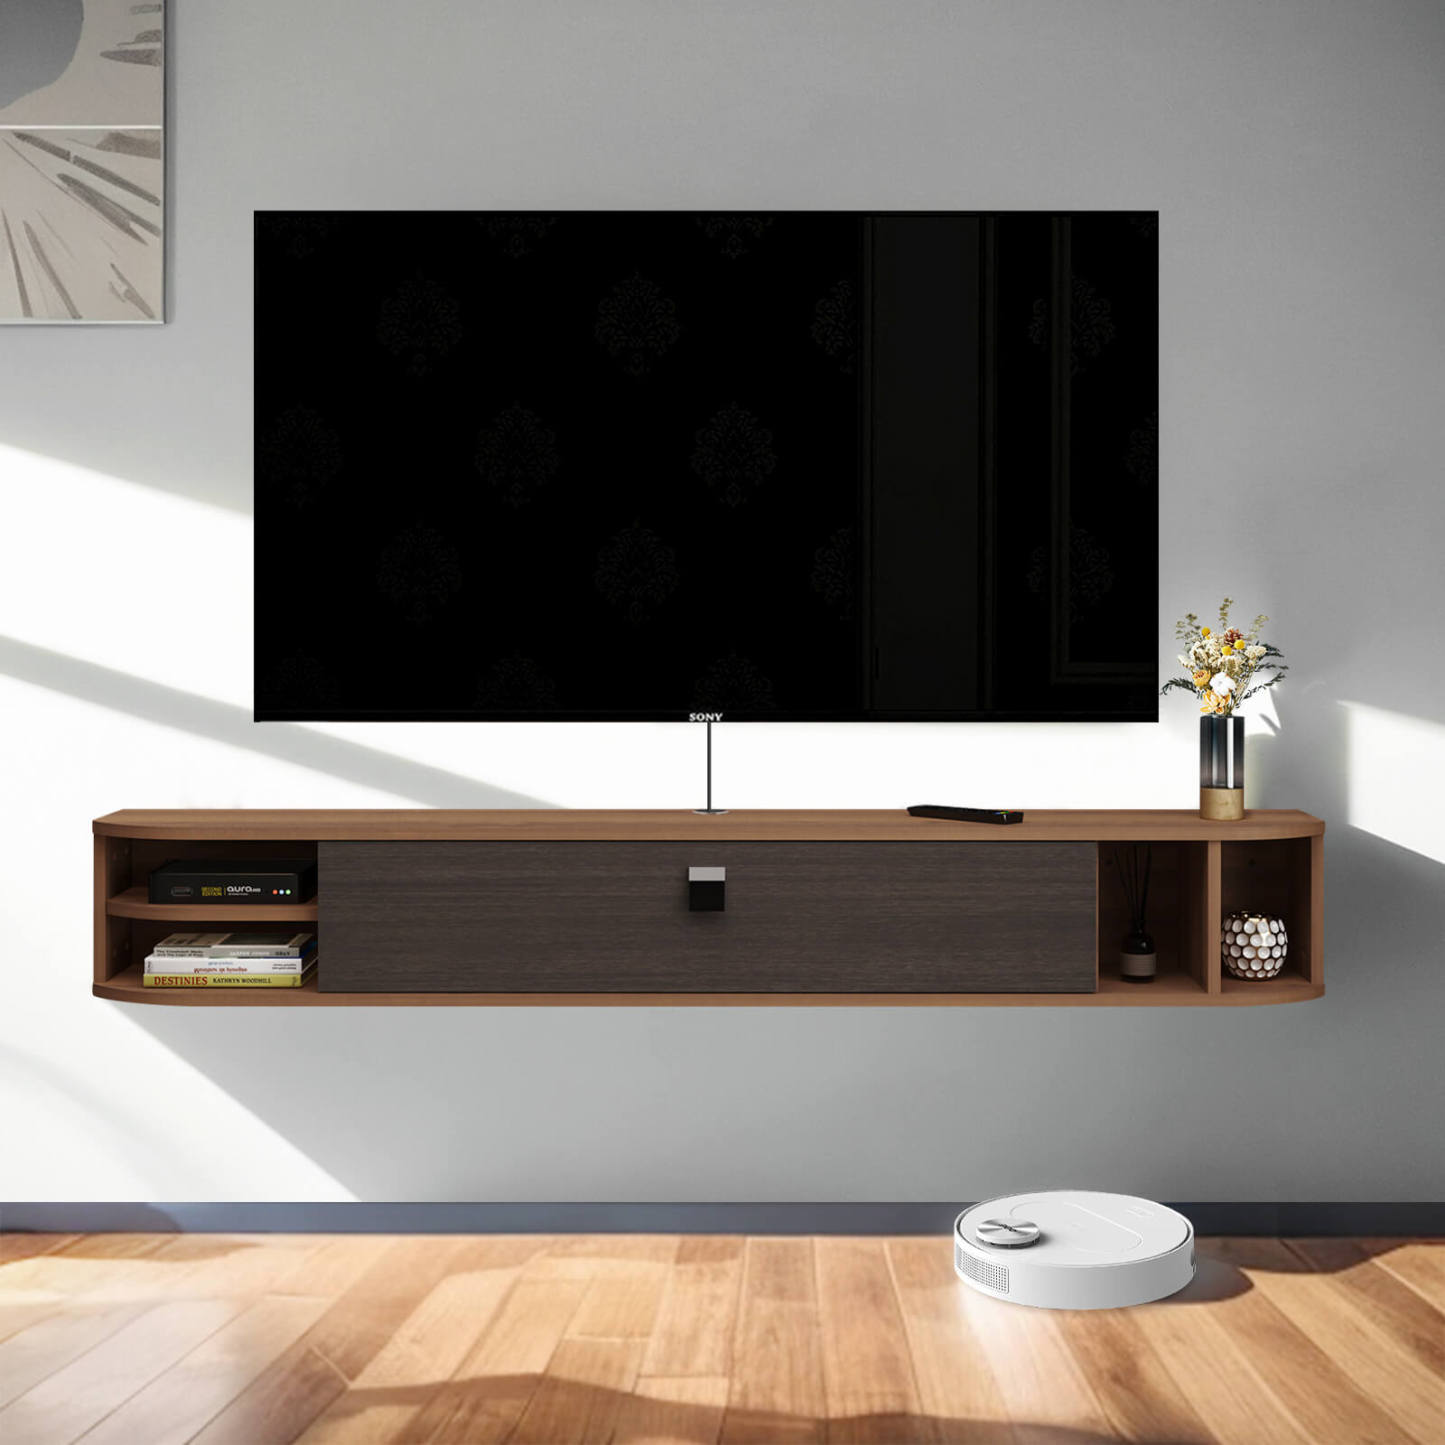 63.01" Modern Wood Floating TV Stand Shelf with Storage Cubbies for 65" 70" TVs, Walnut